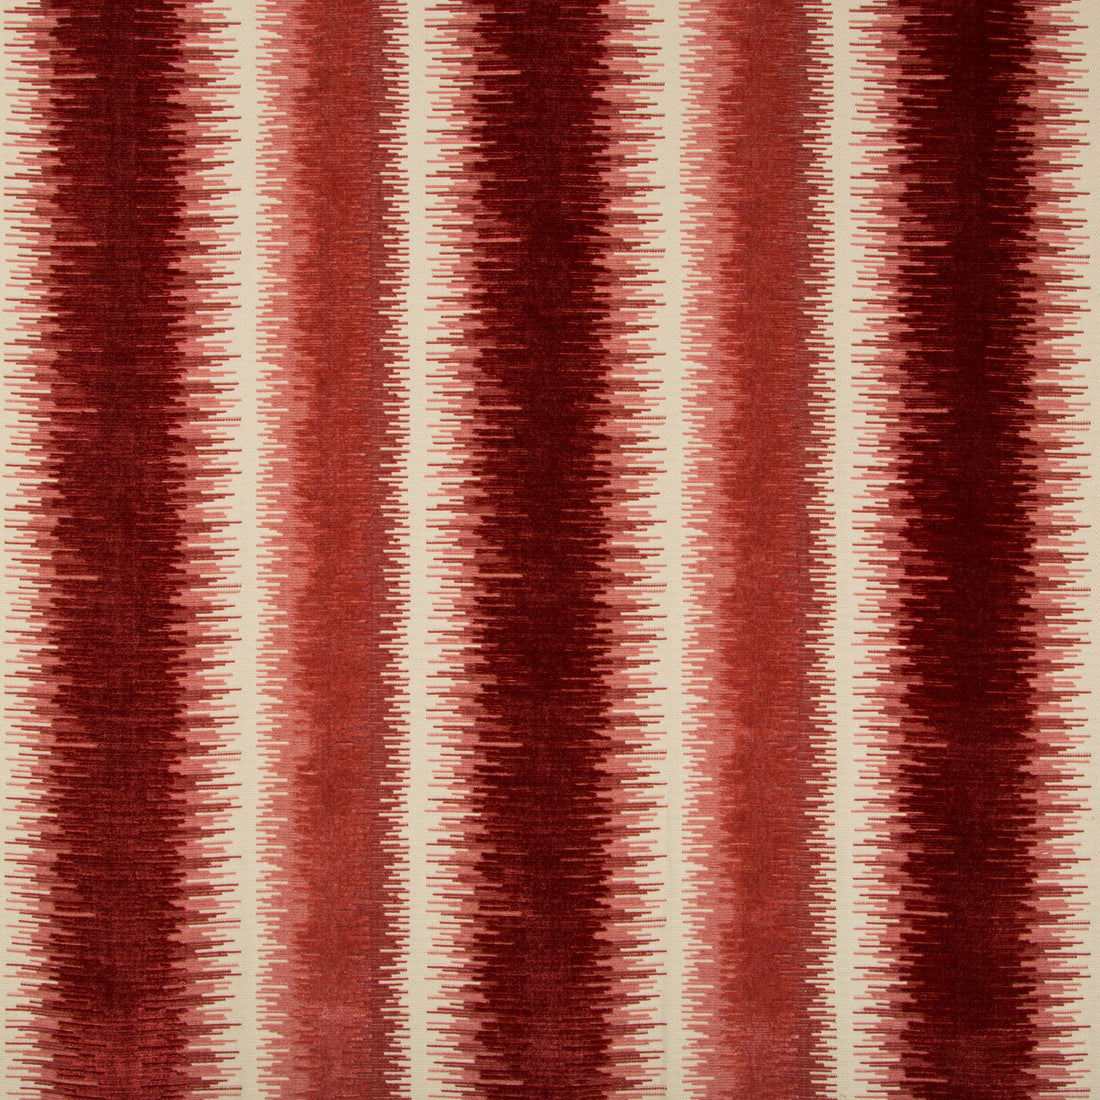 Bromo Velvet fabric in red color - pattern 8018115.197.0 - by Brunschwig &amp; Fils in the Baret collection